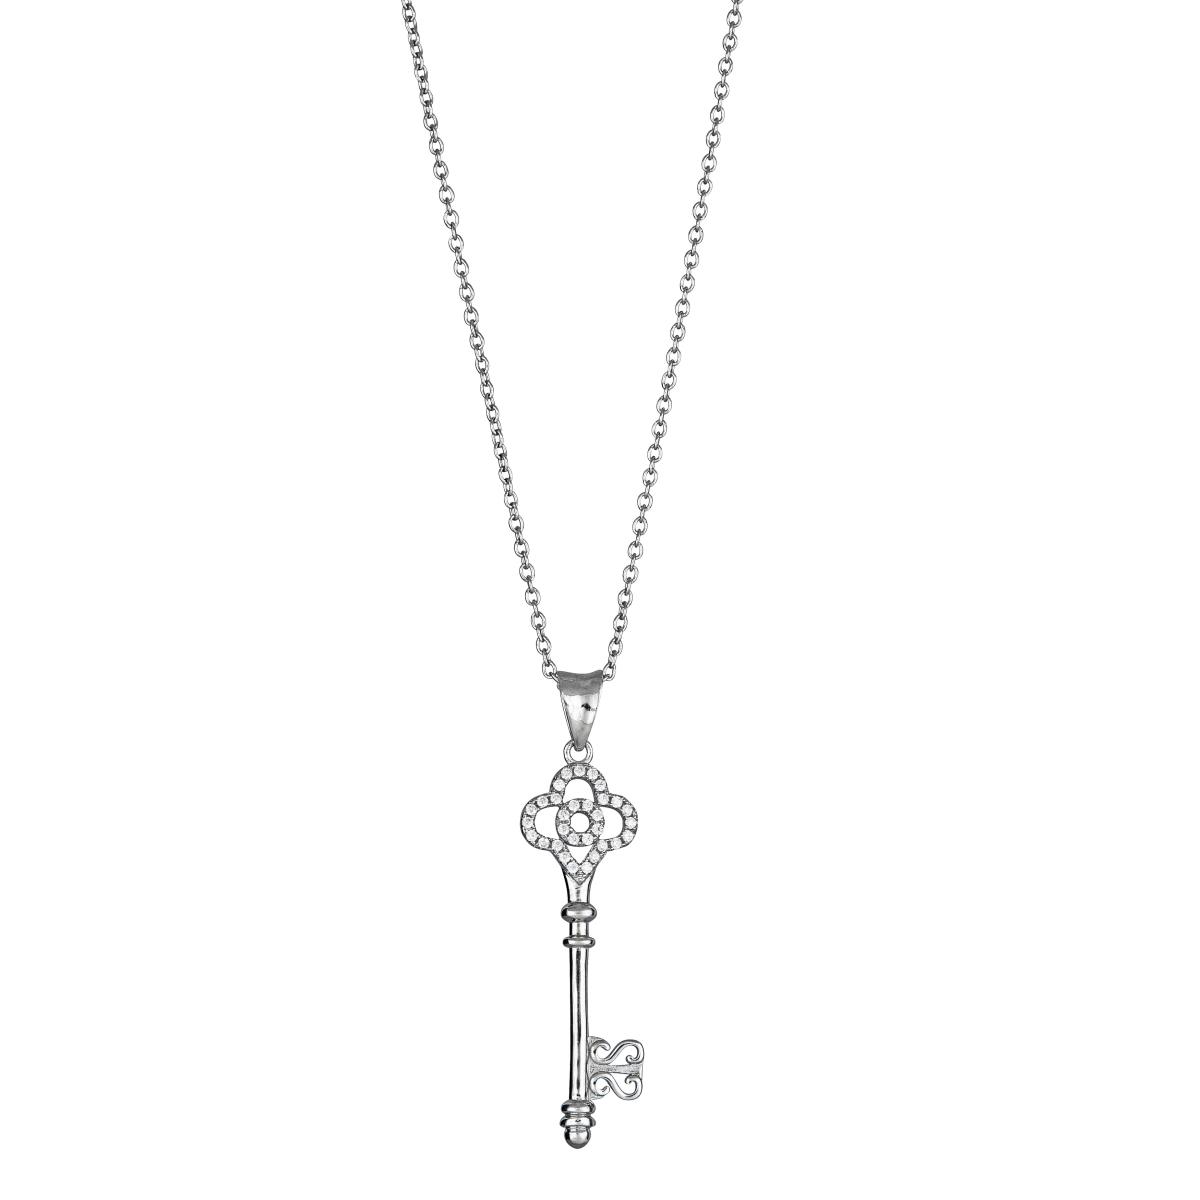 Sterling Silver Rhodium Micropave Clover Key 18" Necklace with 2" Extension